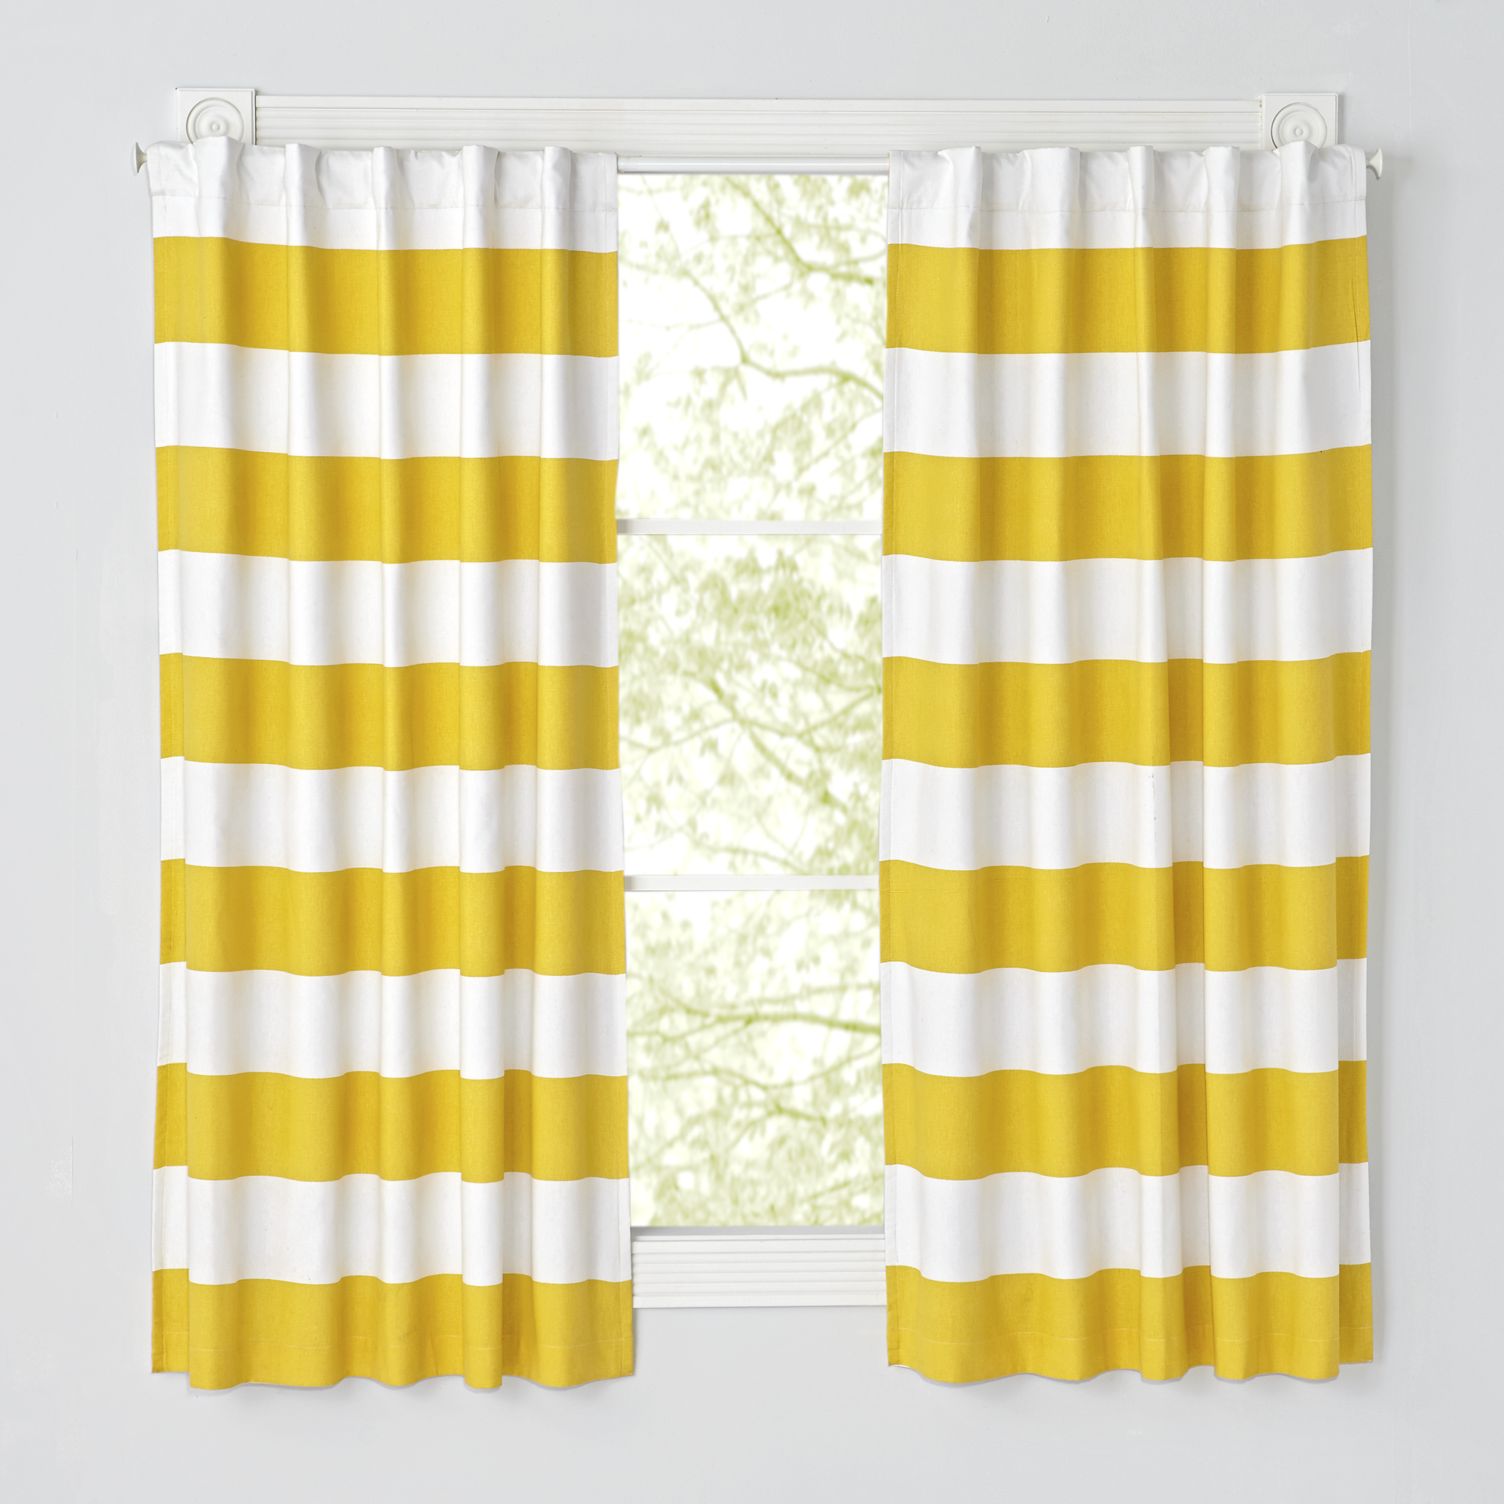 Yellow-and-white-striped-curtains